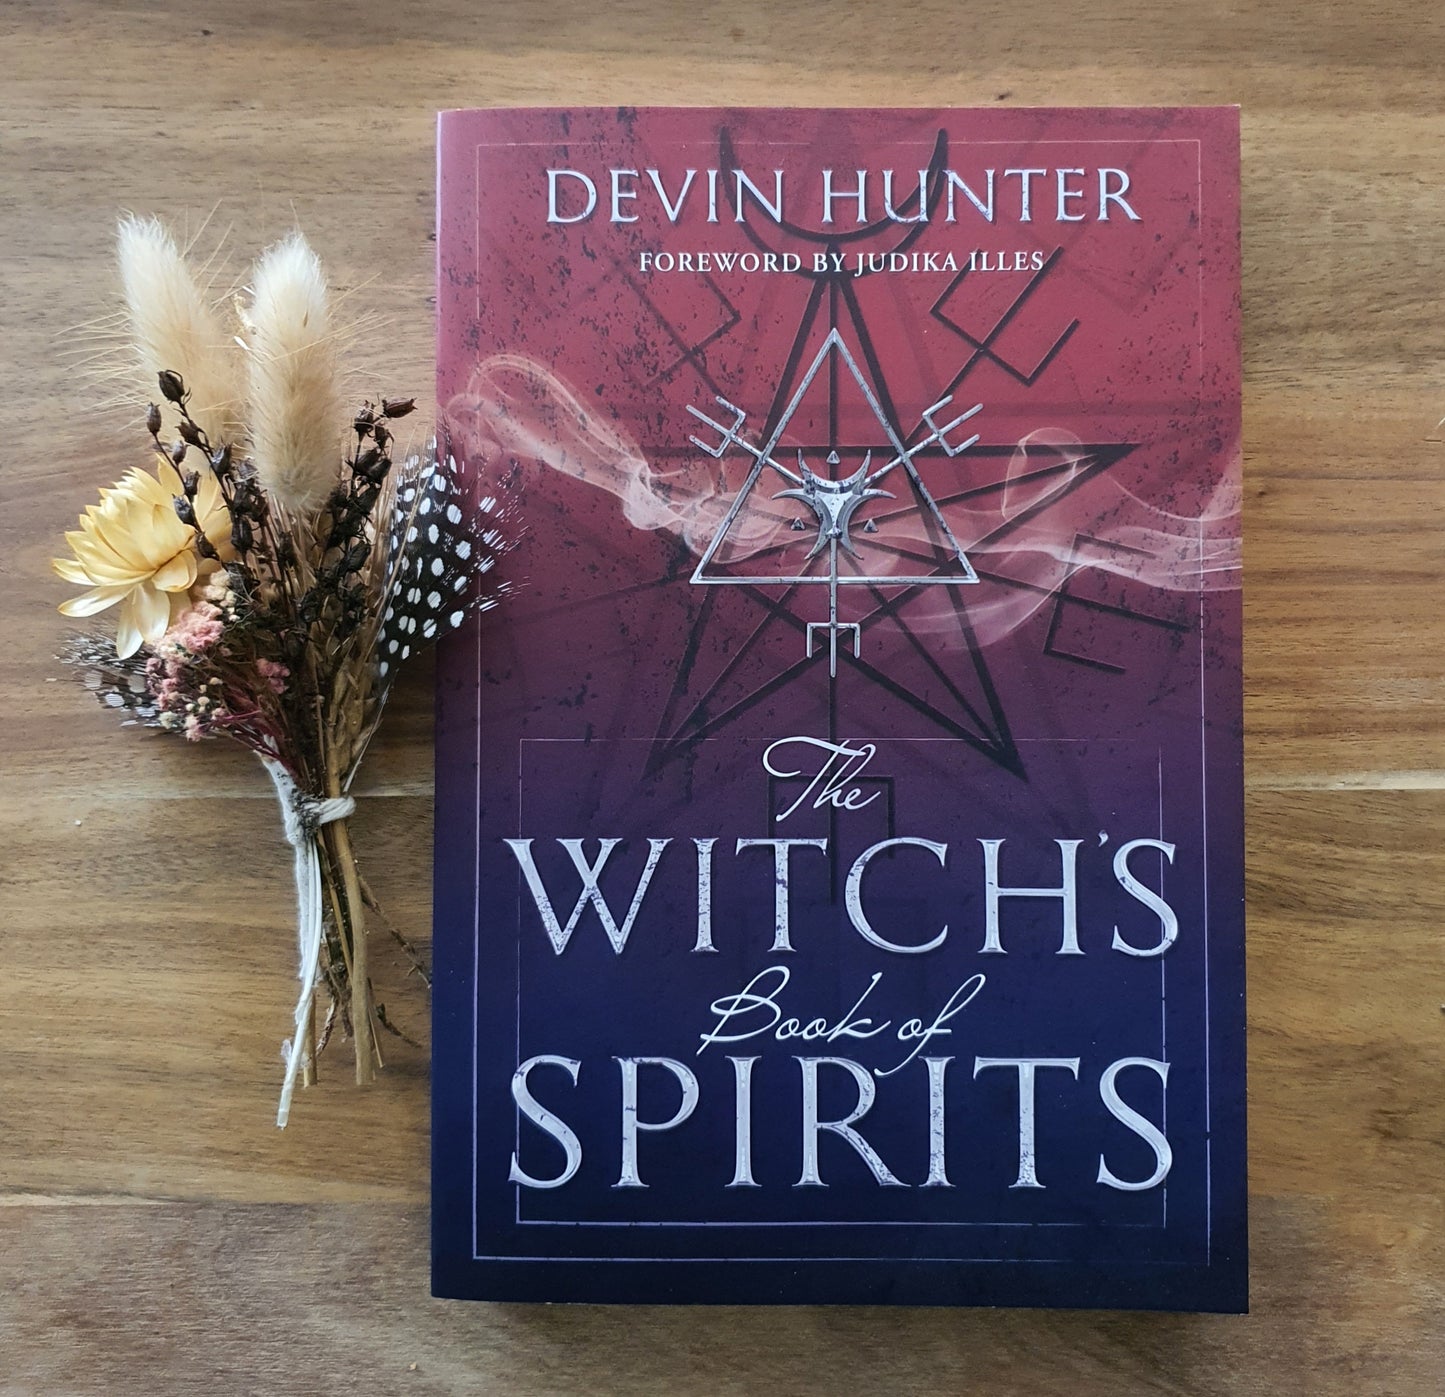 The Witch's Book Of Spirits